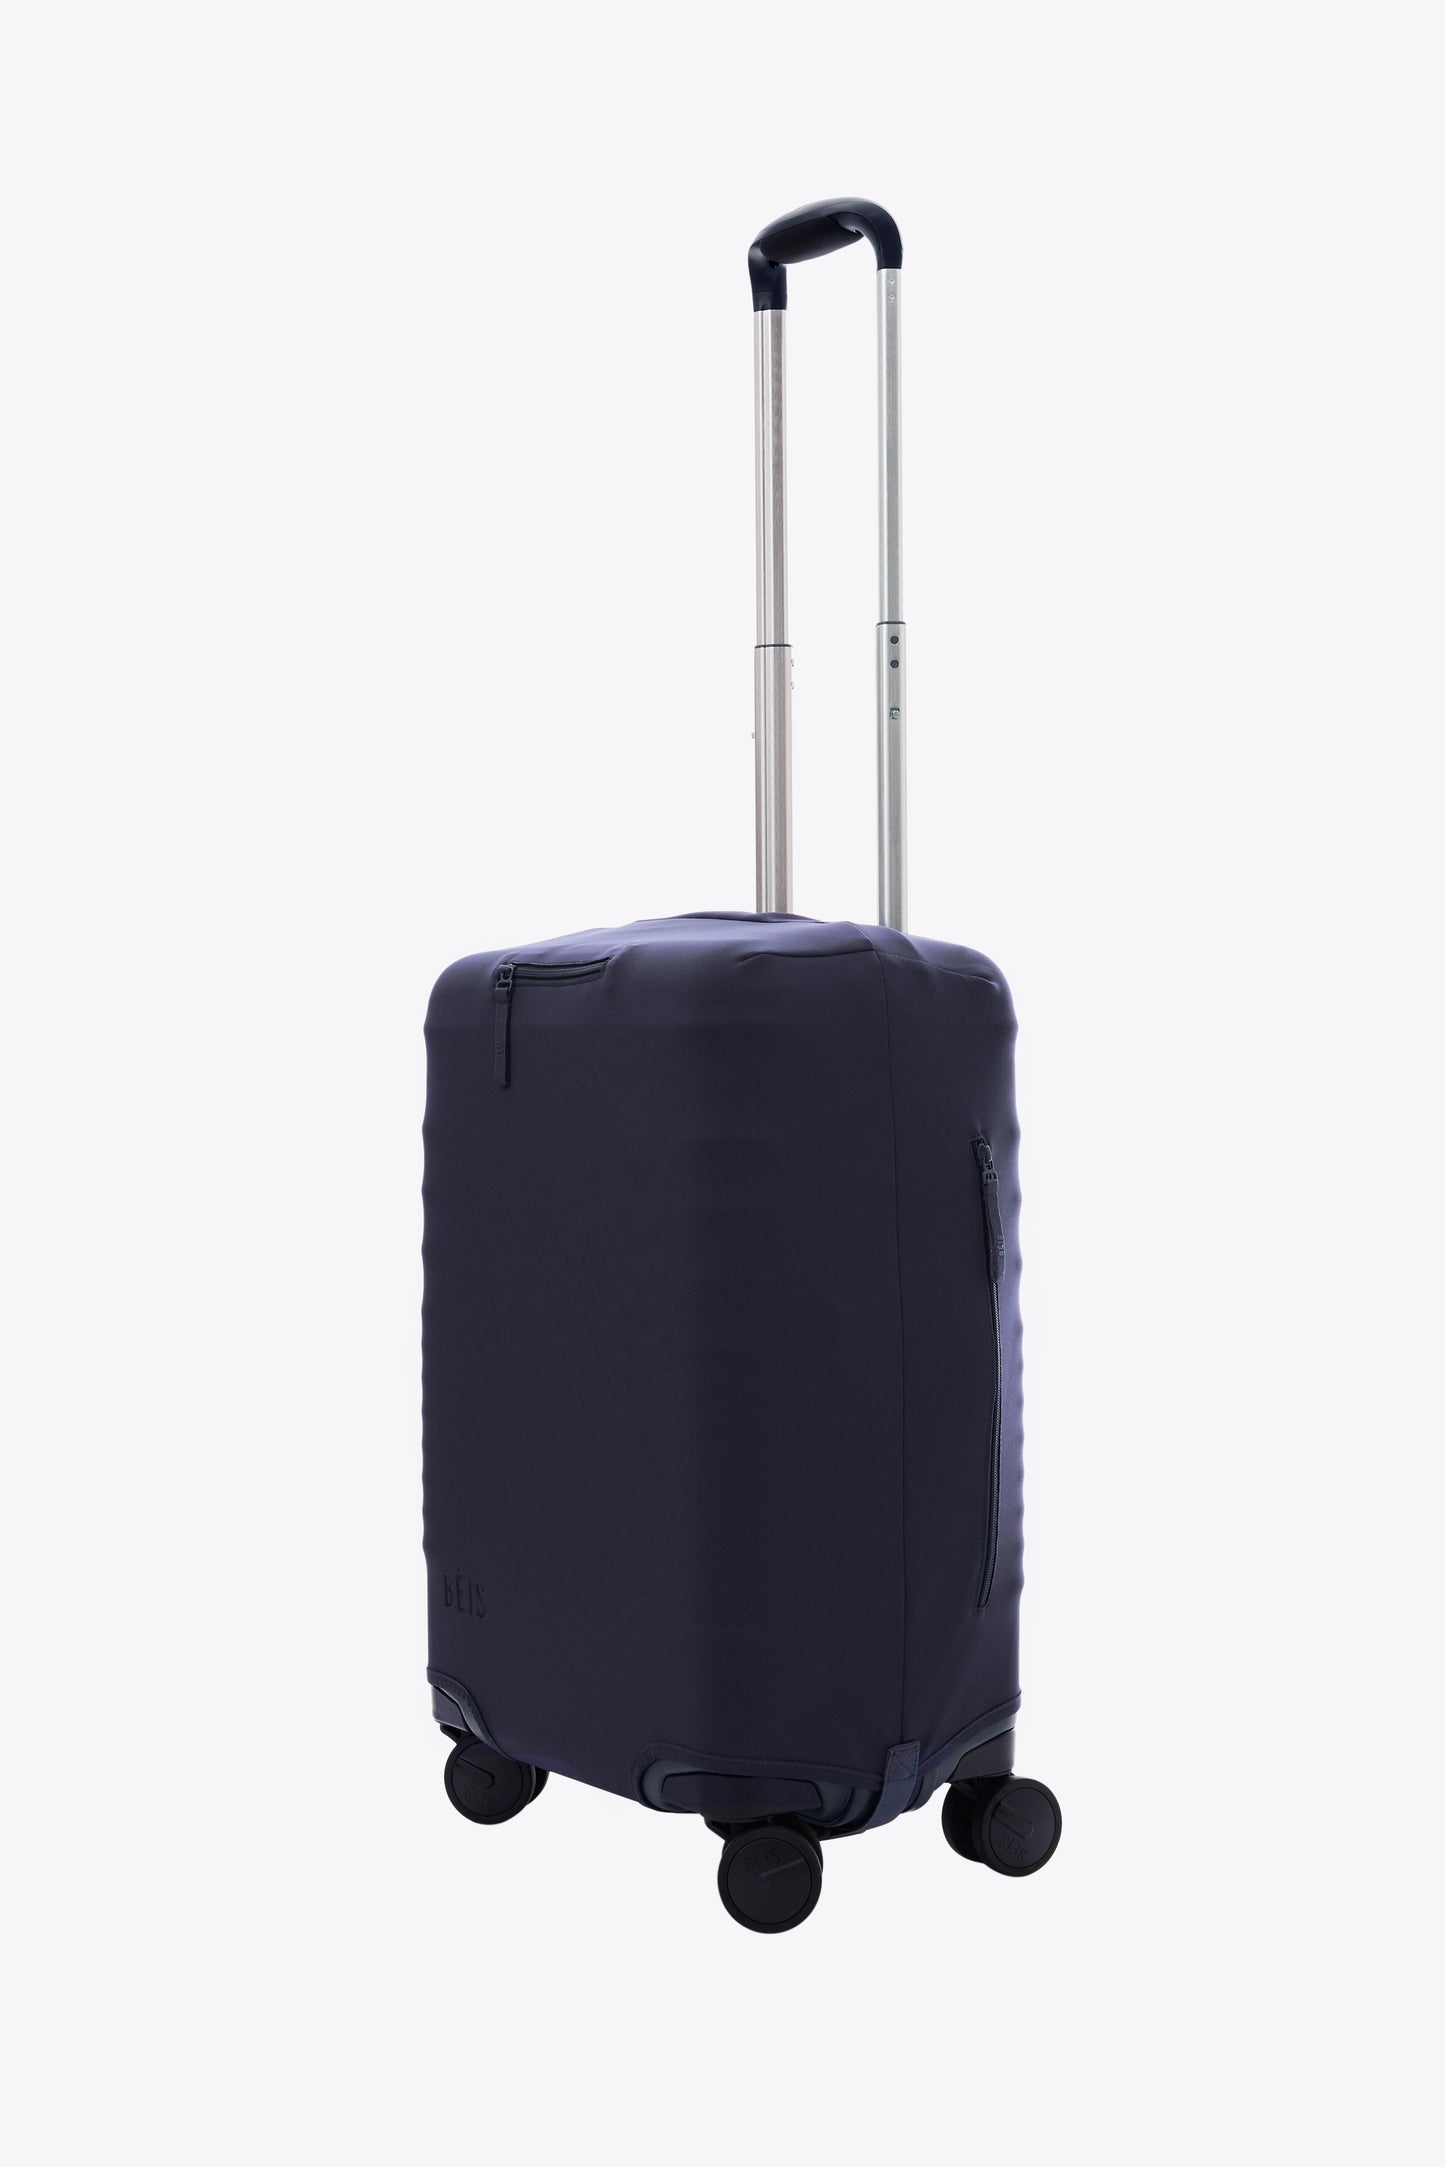 The Carry-On Luggage Cover in Navy